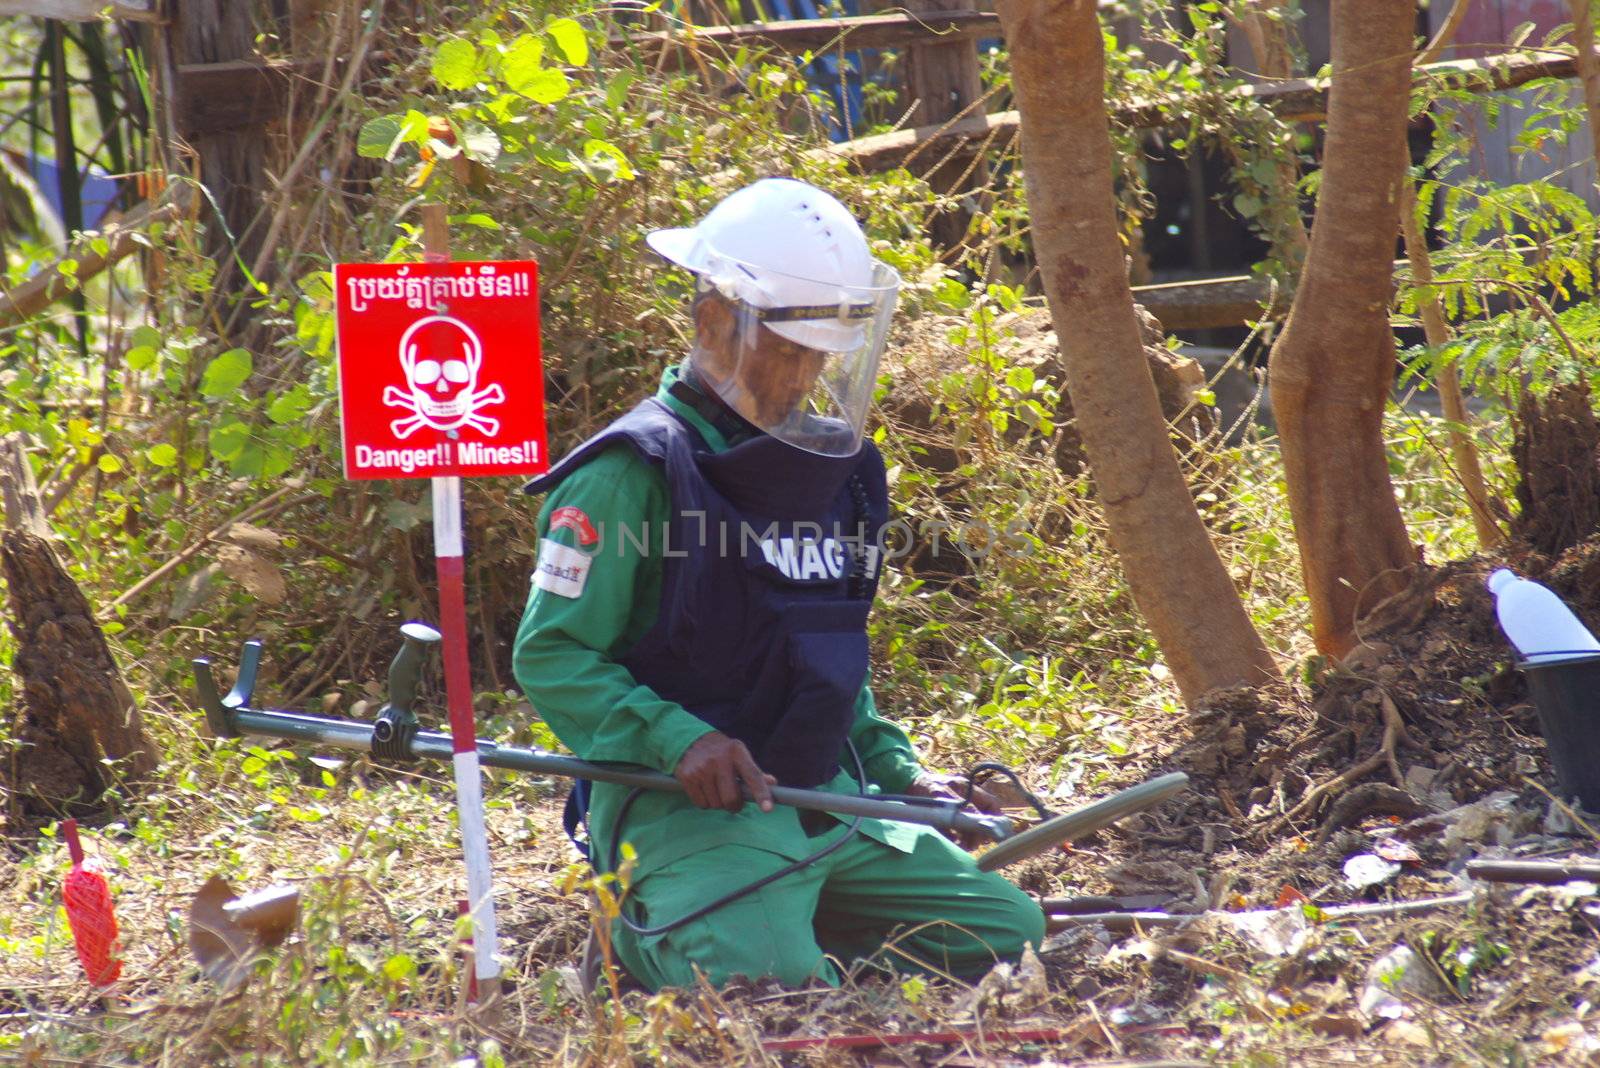 Clearing land mines